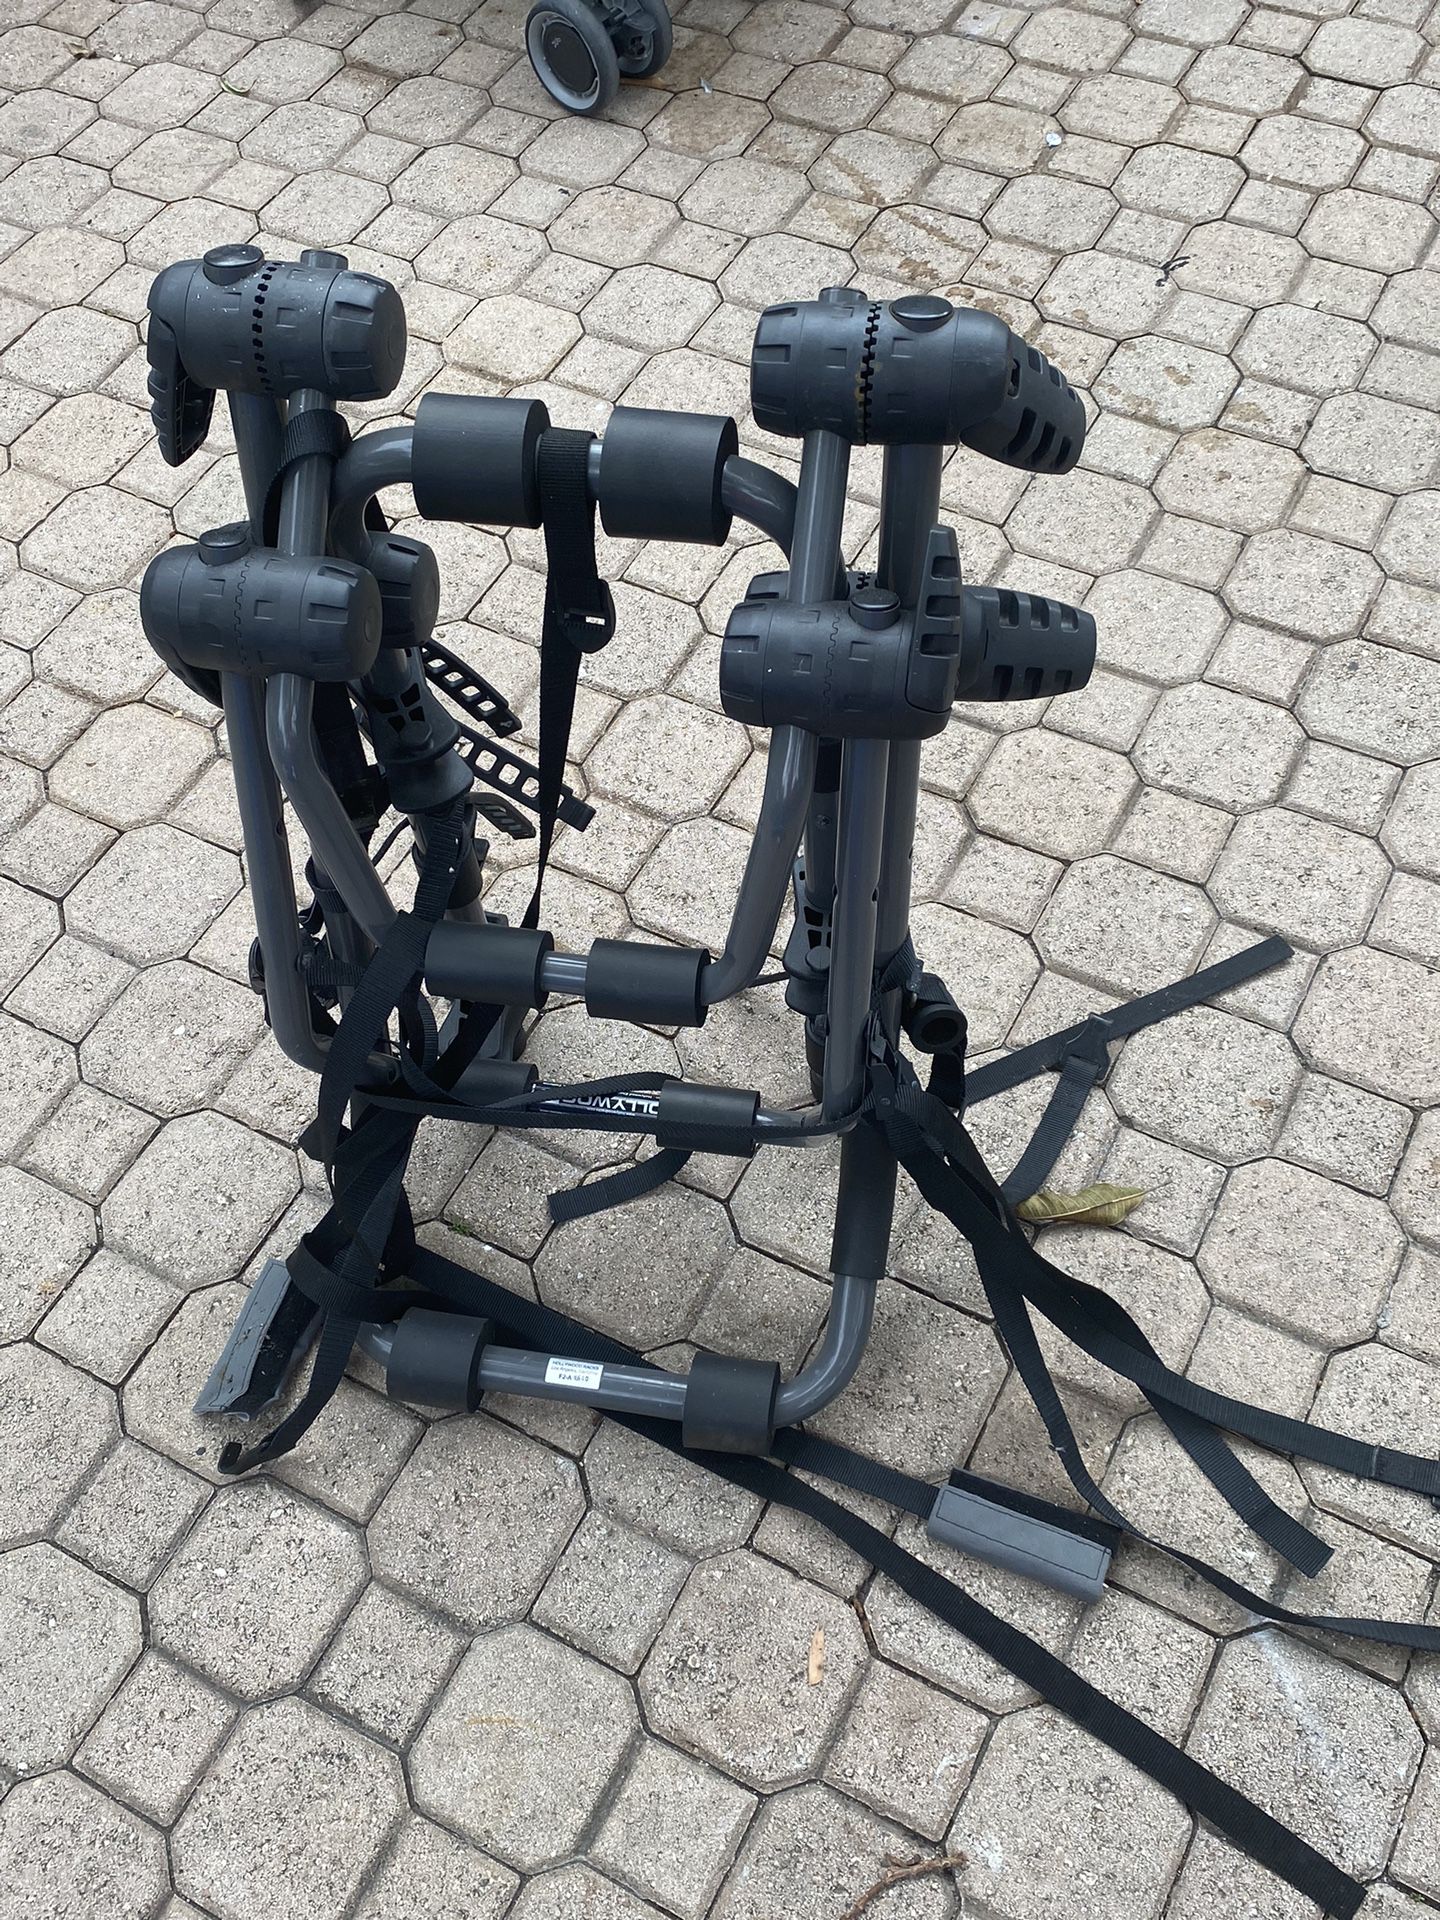 Bike Rack In Good Condition $60 